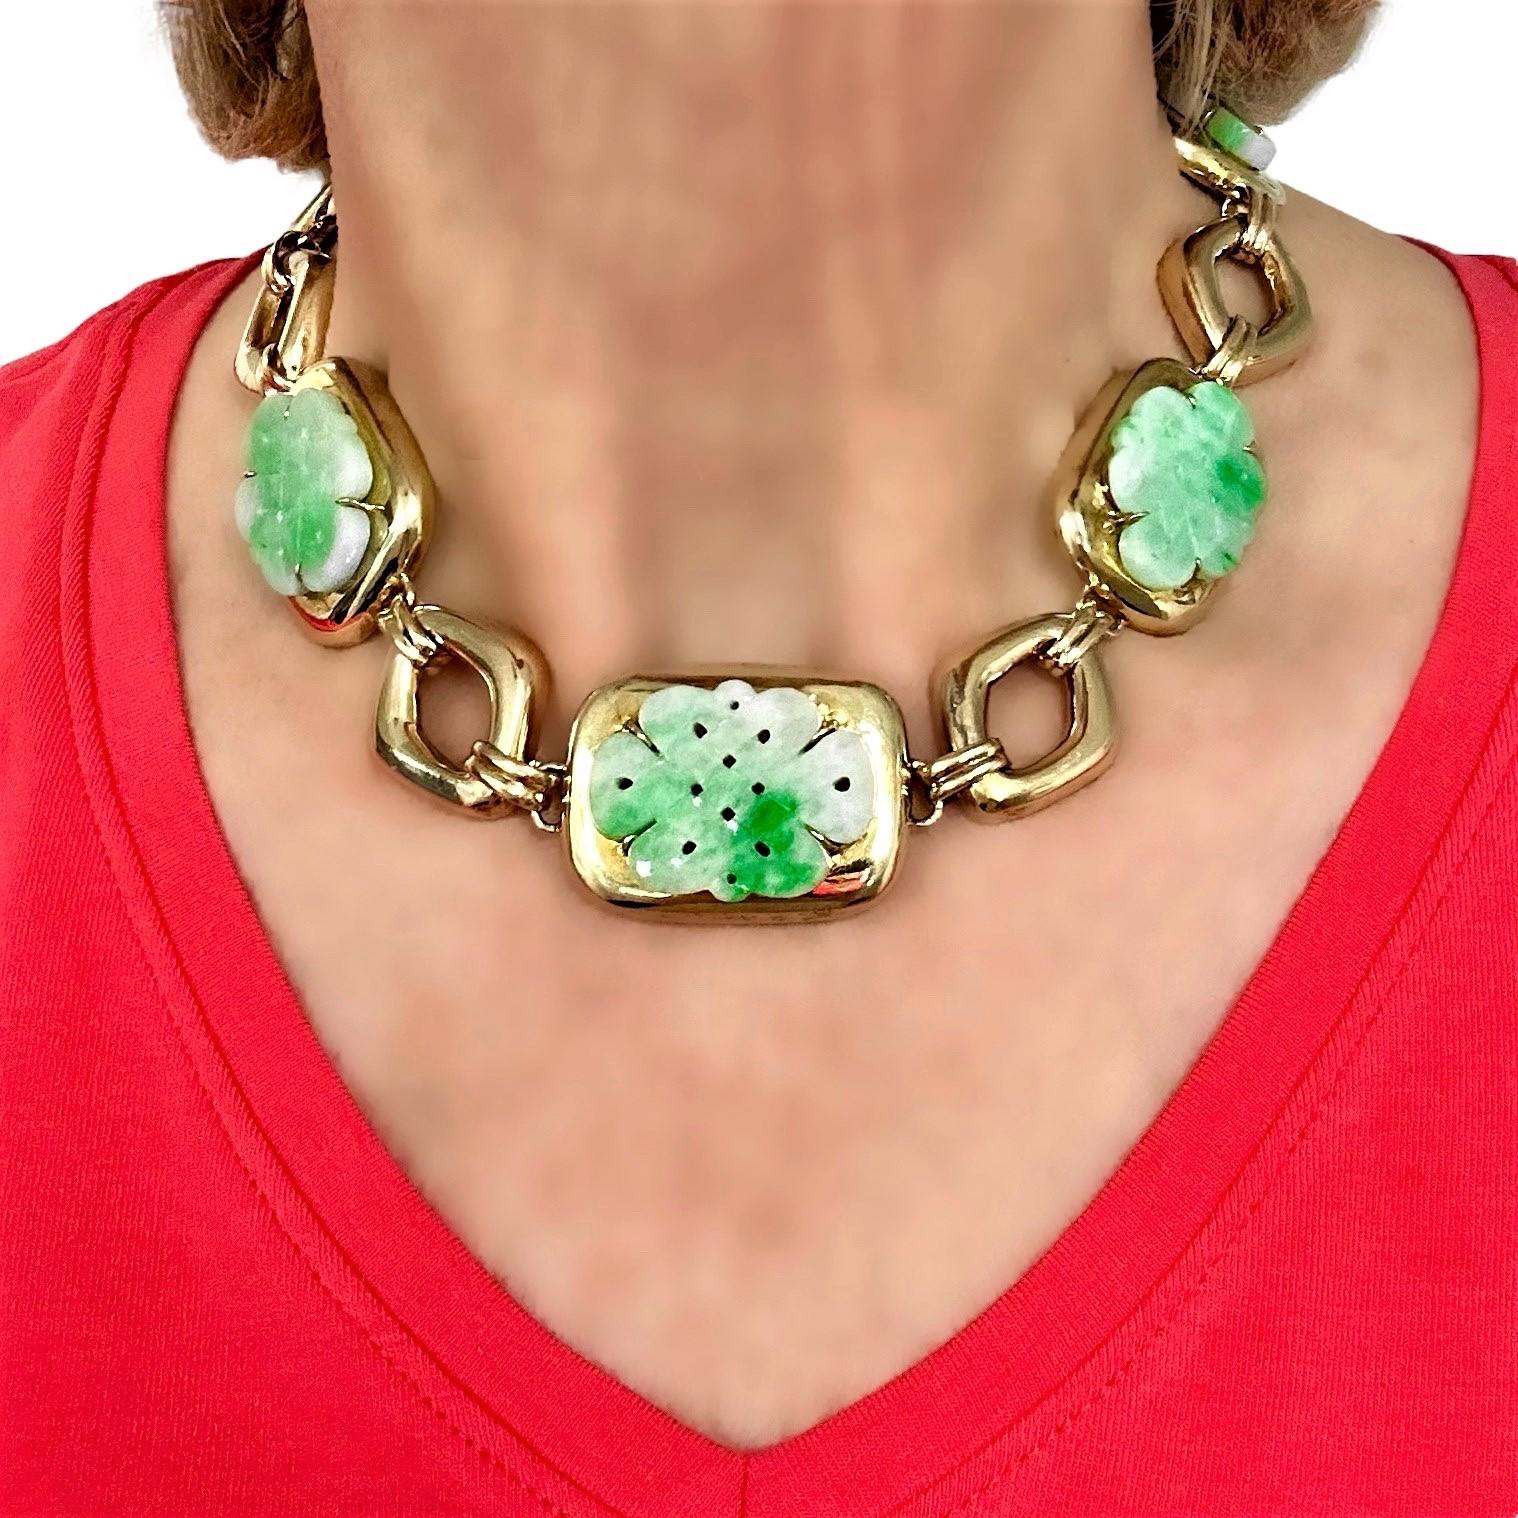 Massive and Distinctive 18K Gold and Jadeite Jade Choker Necklace by Trio For Sale 2